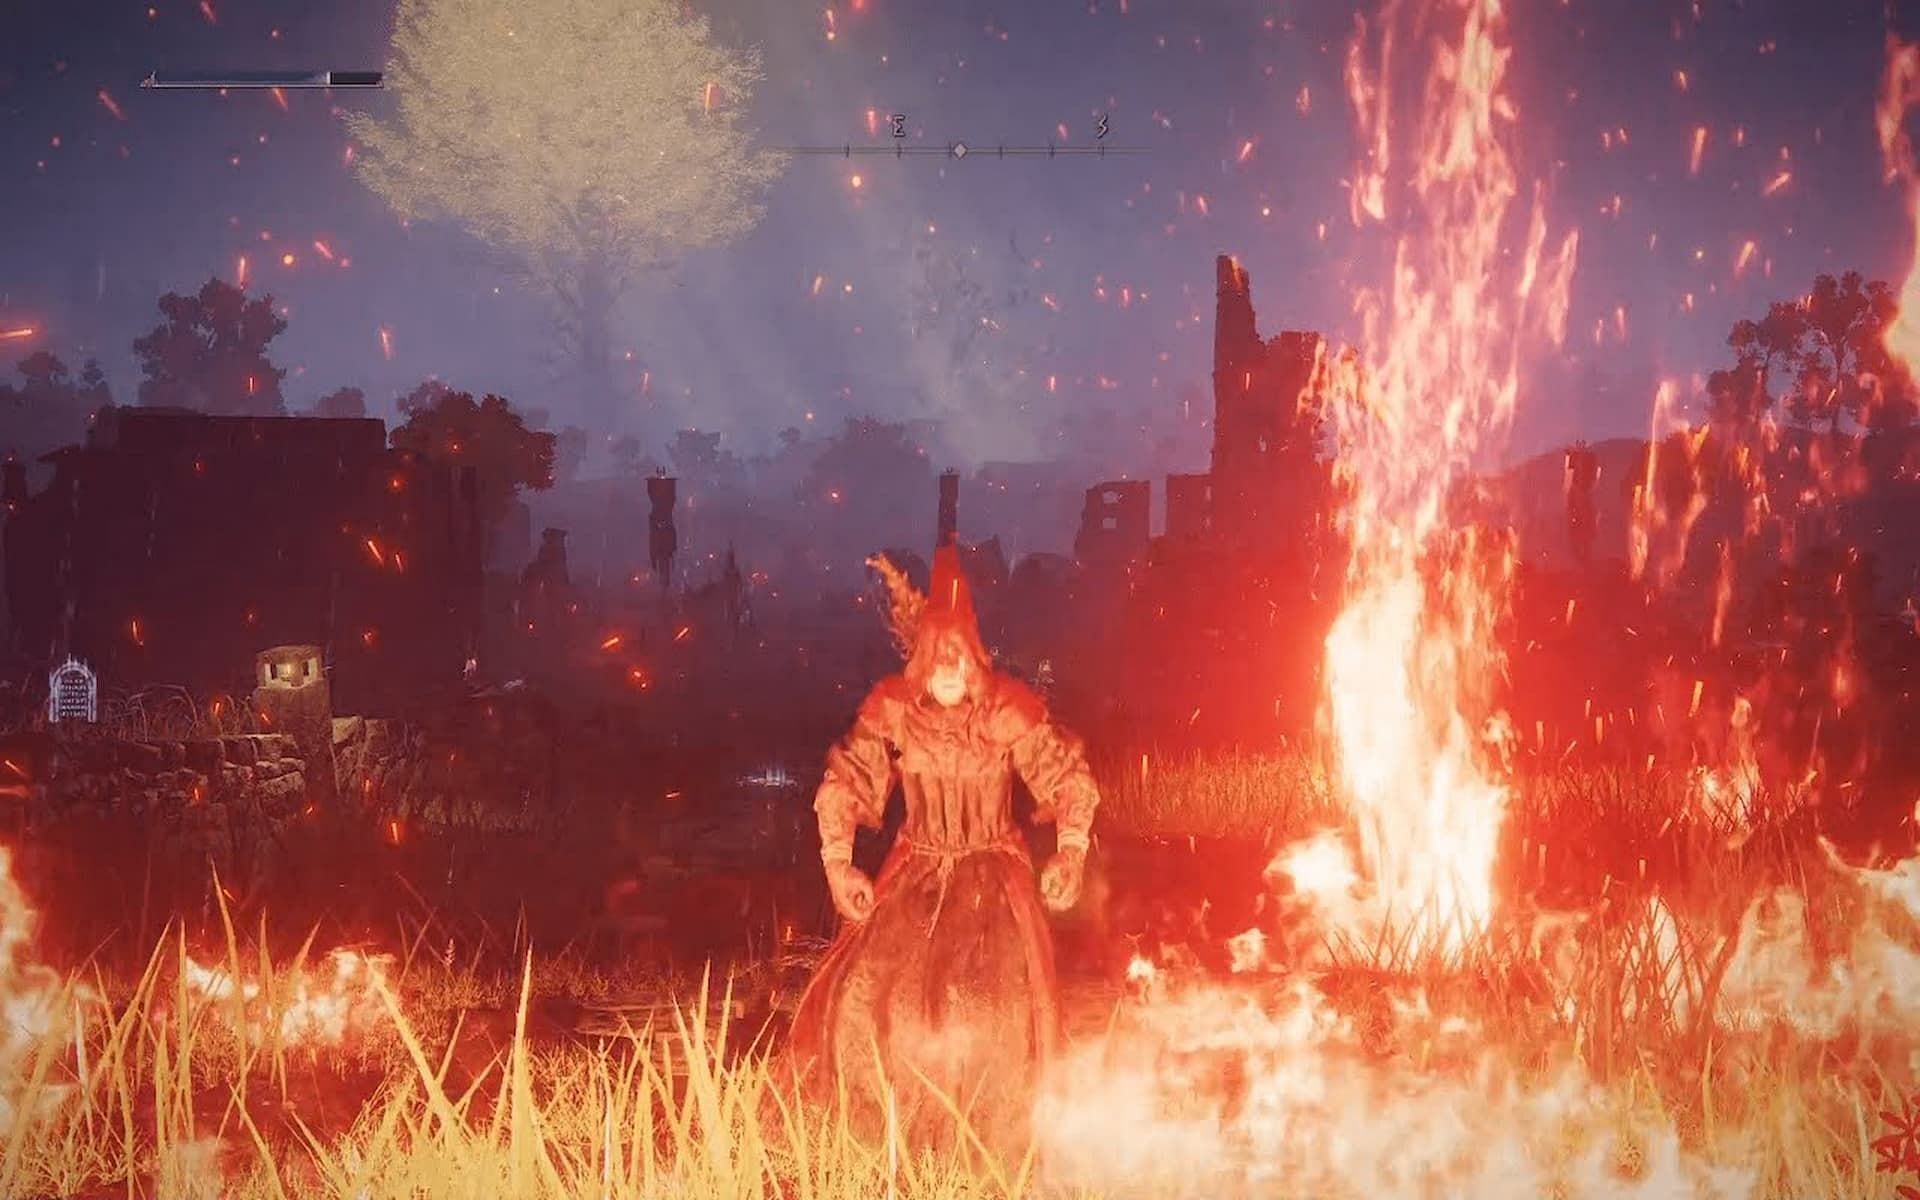 A Tarnished stands, surrounded by fire in Elden Ring (Image via FromSoftware Inc.)